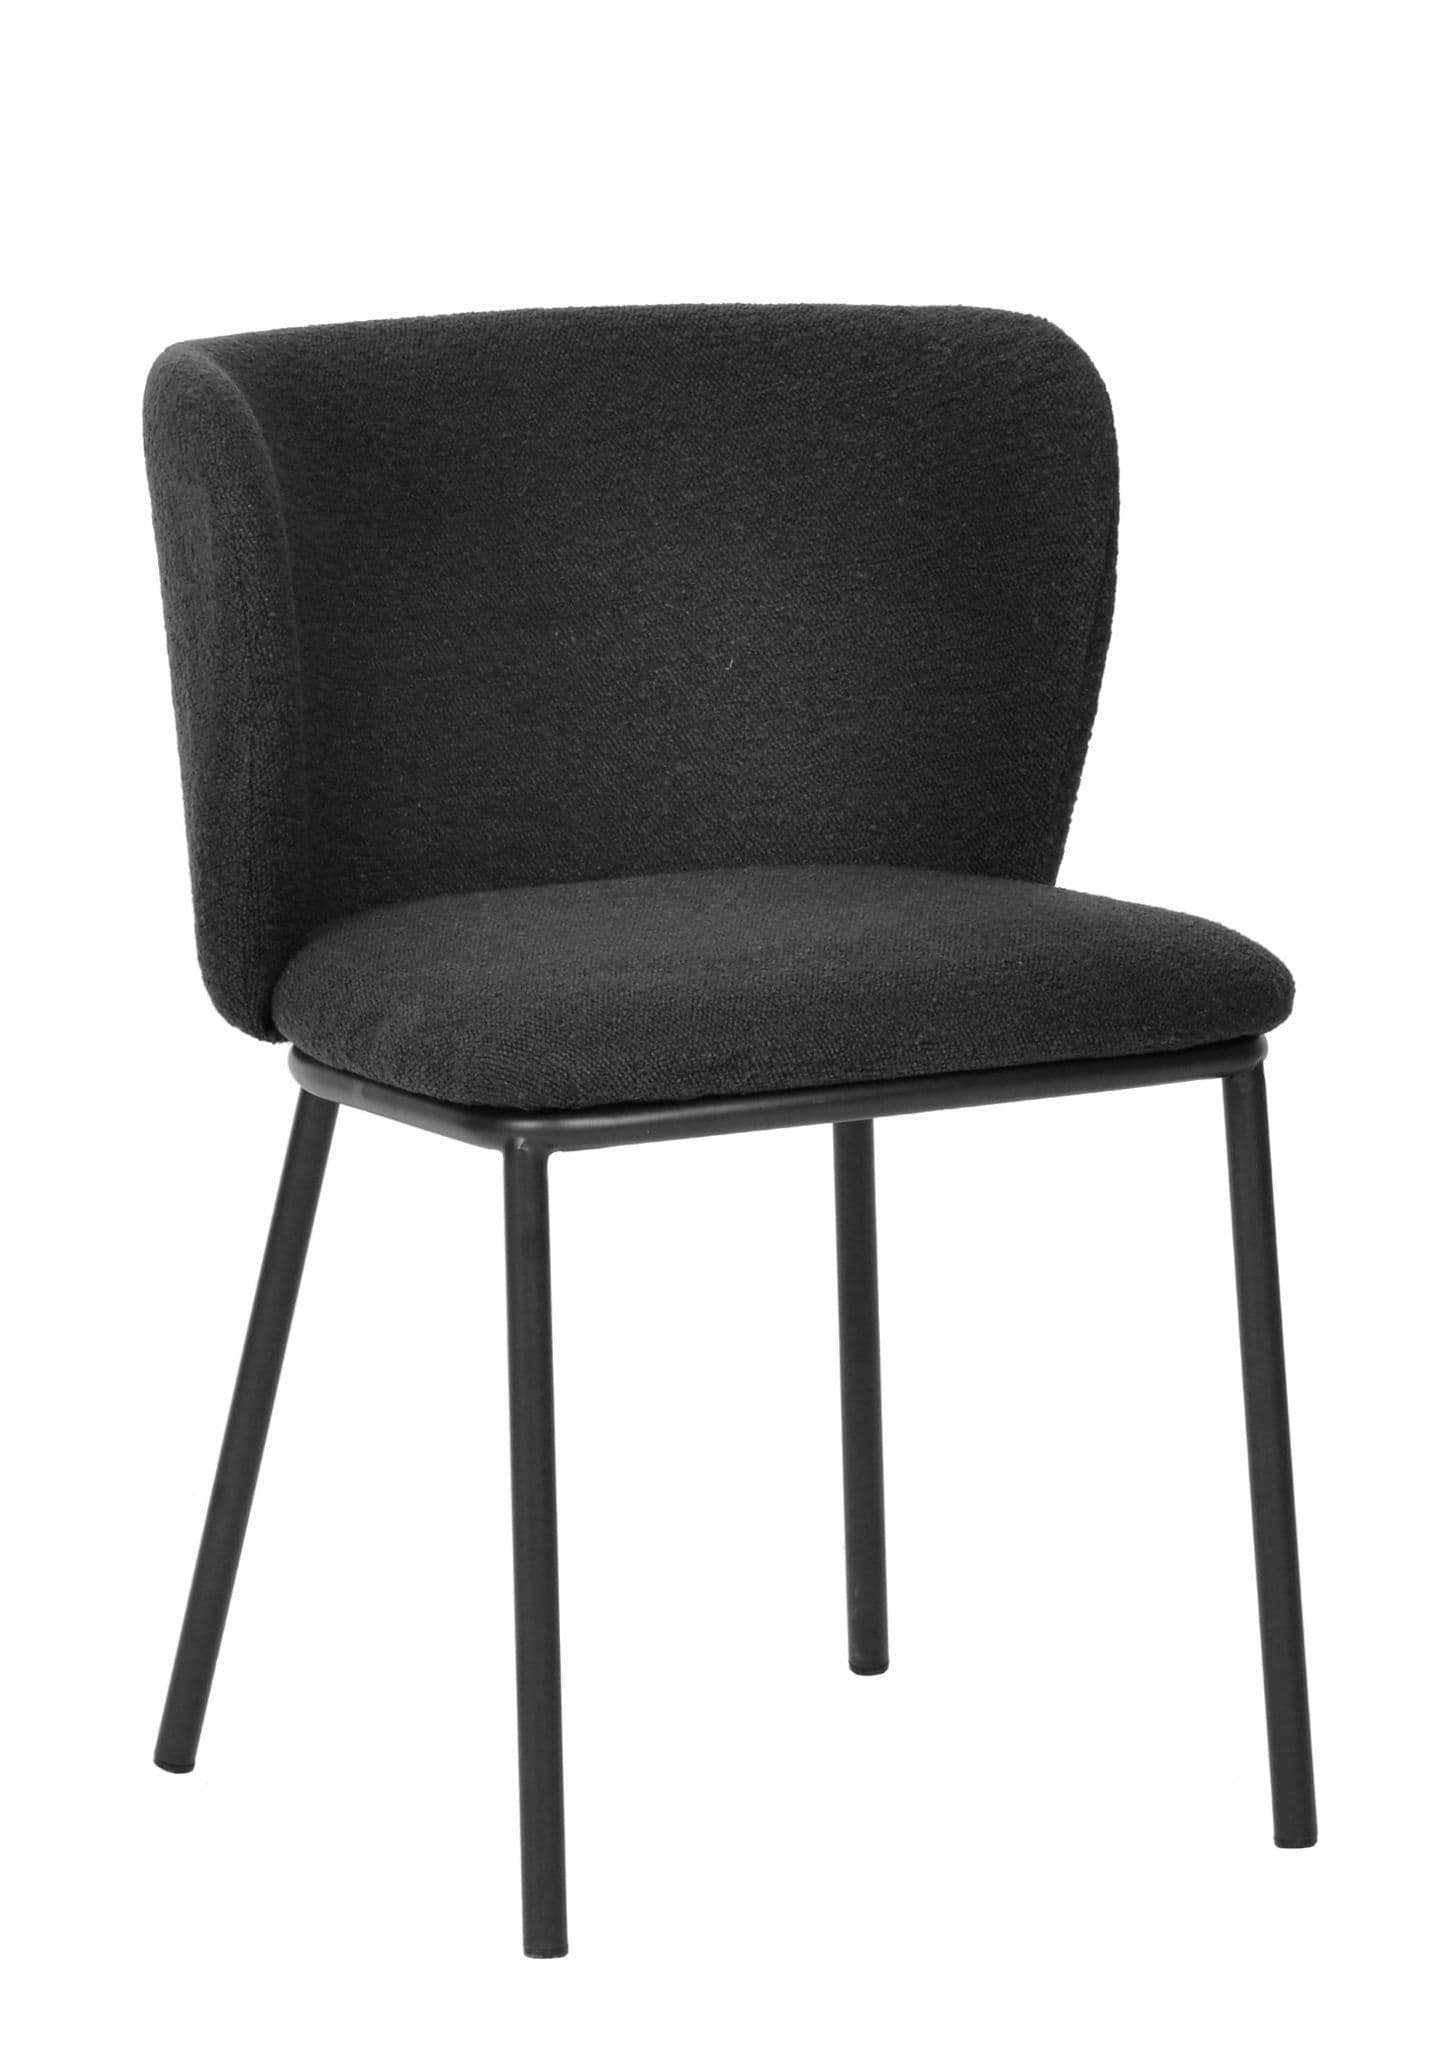 Set of 2 Dark Grey Dining Chairs with Black Metal Legs